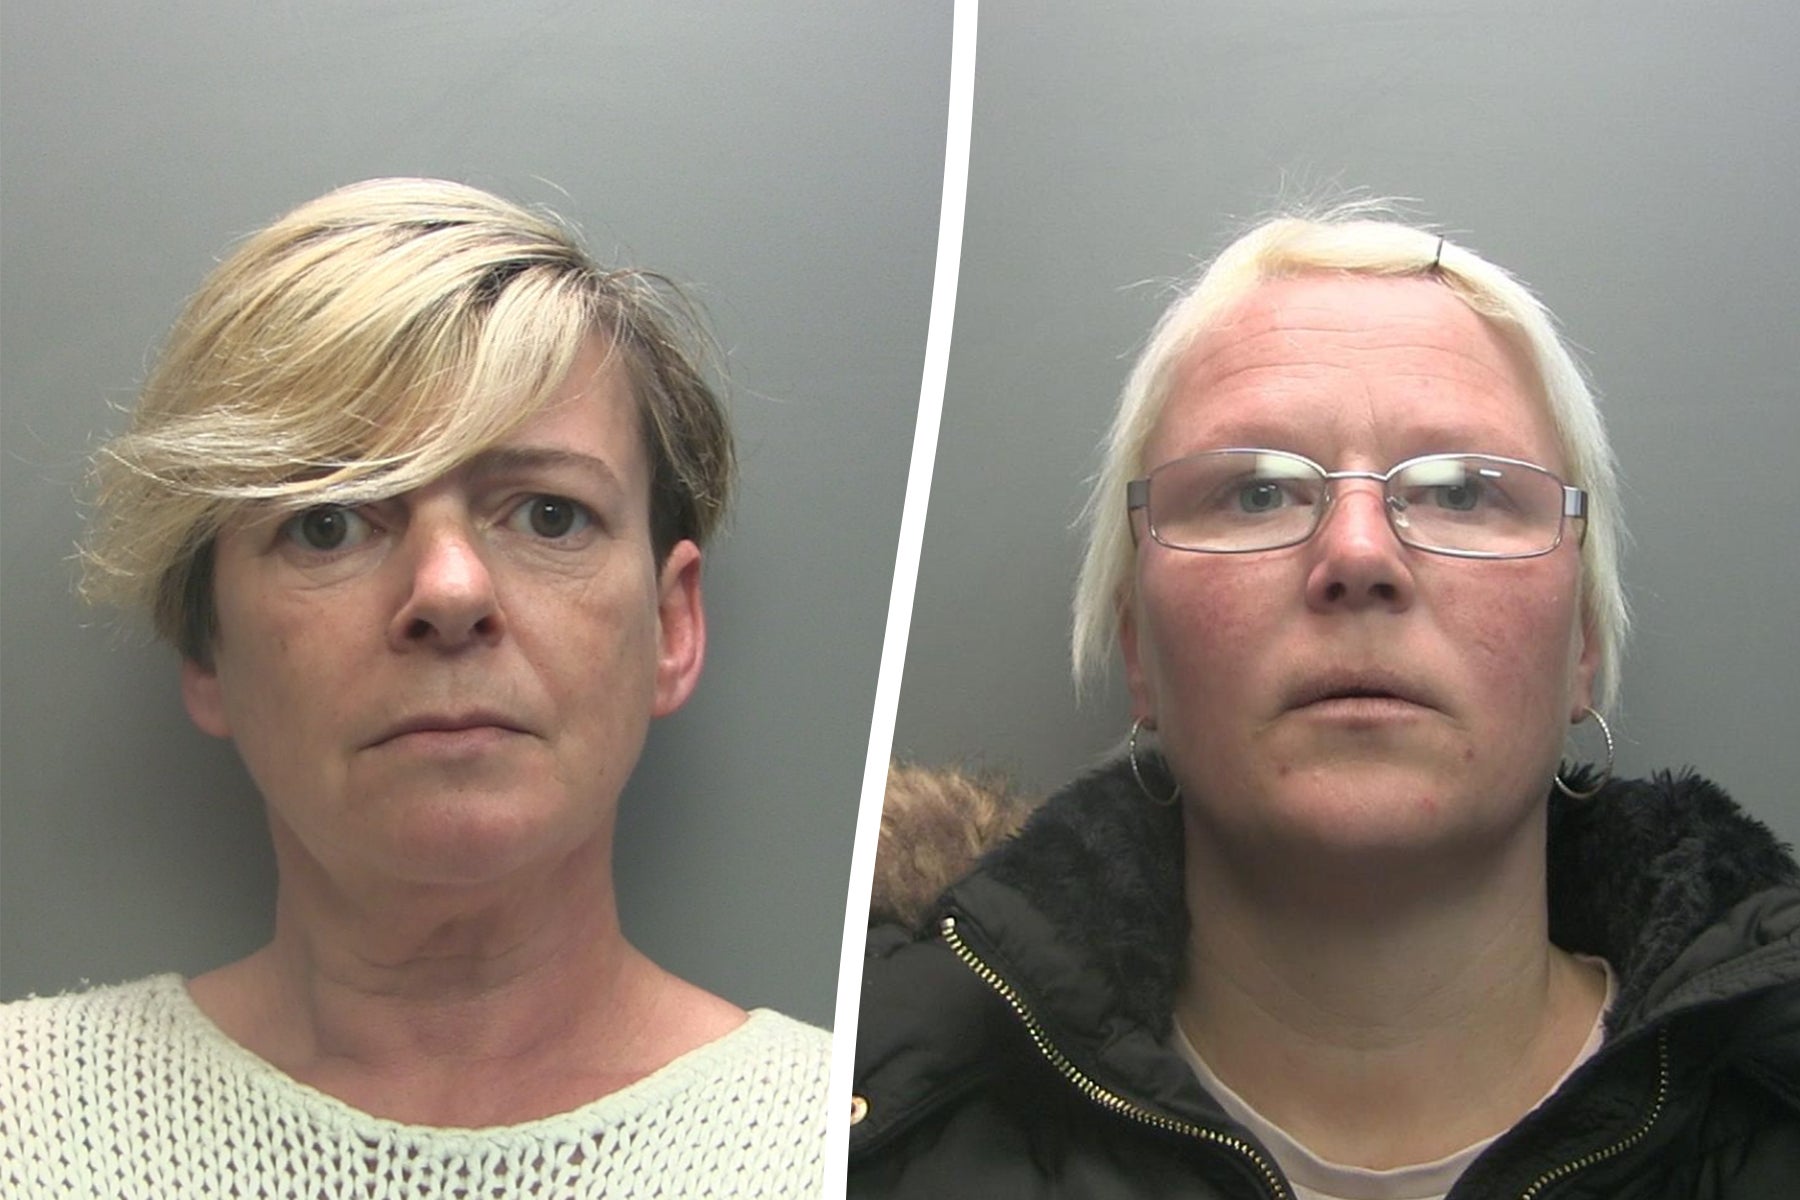 Nicola Bradley, 35, and Tracy Dixon, 47, doused Paul Crooks's beloved pet Sparky in cleaning products and put her in a tumble drier before breaking her neck